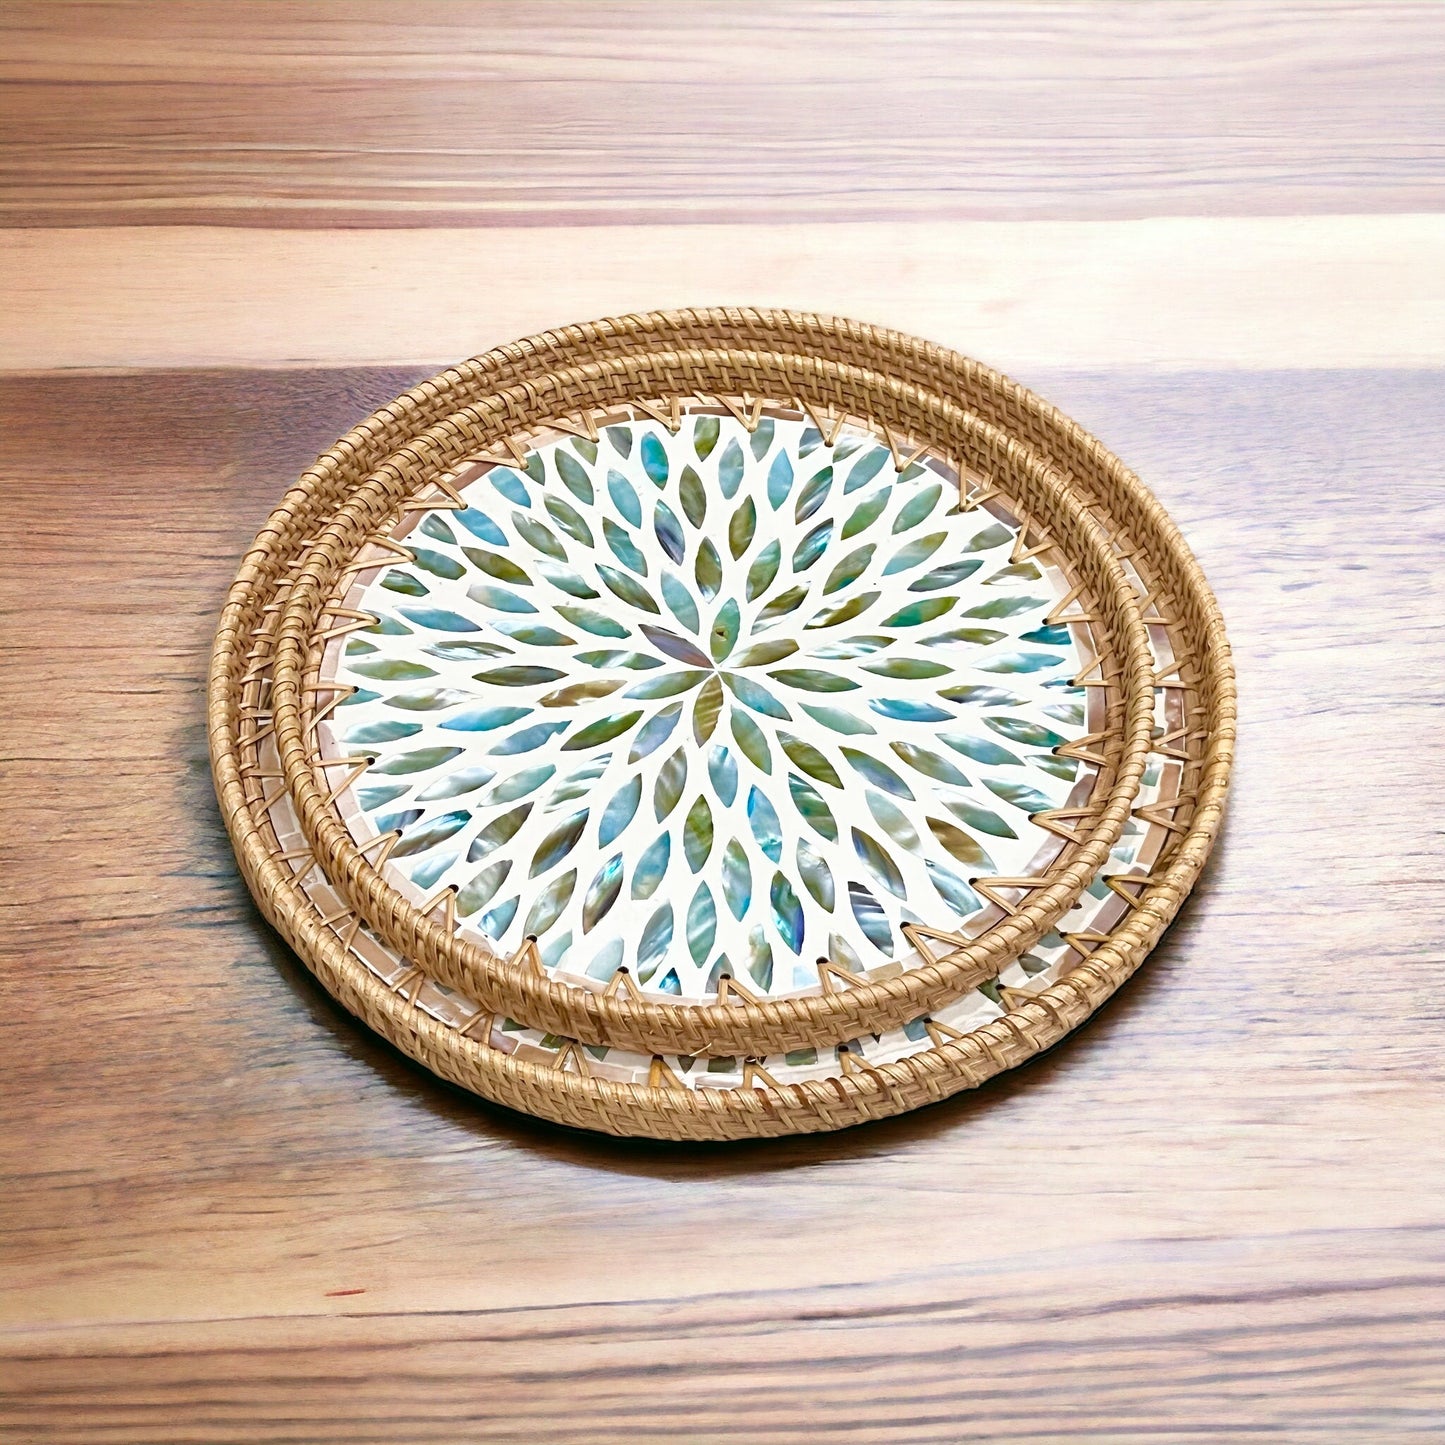 Hand-woven Rattan & Aqua flower Mother Pearl Round Decoration Serving TrayTuNaCraftCollectionSize S